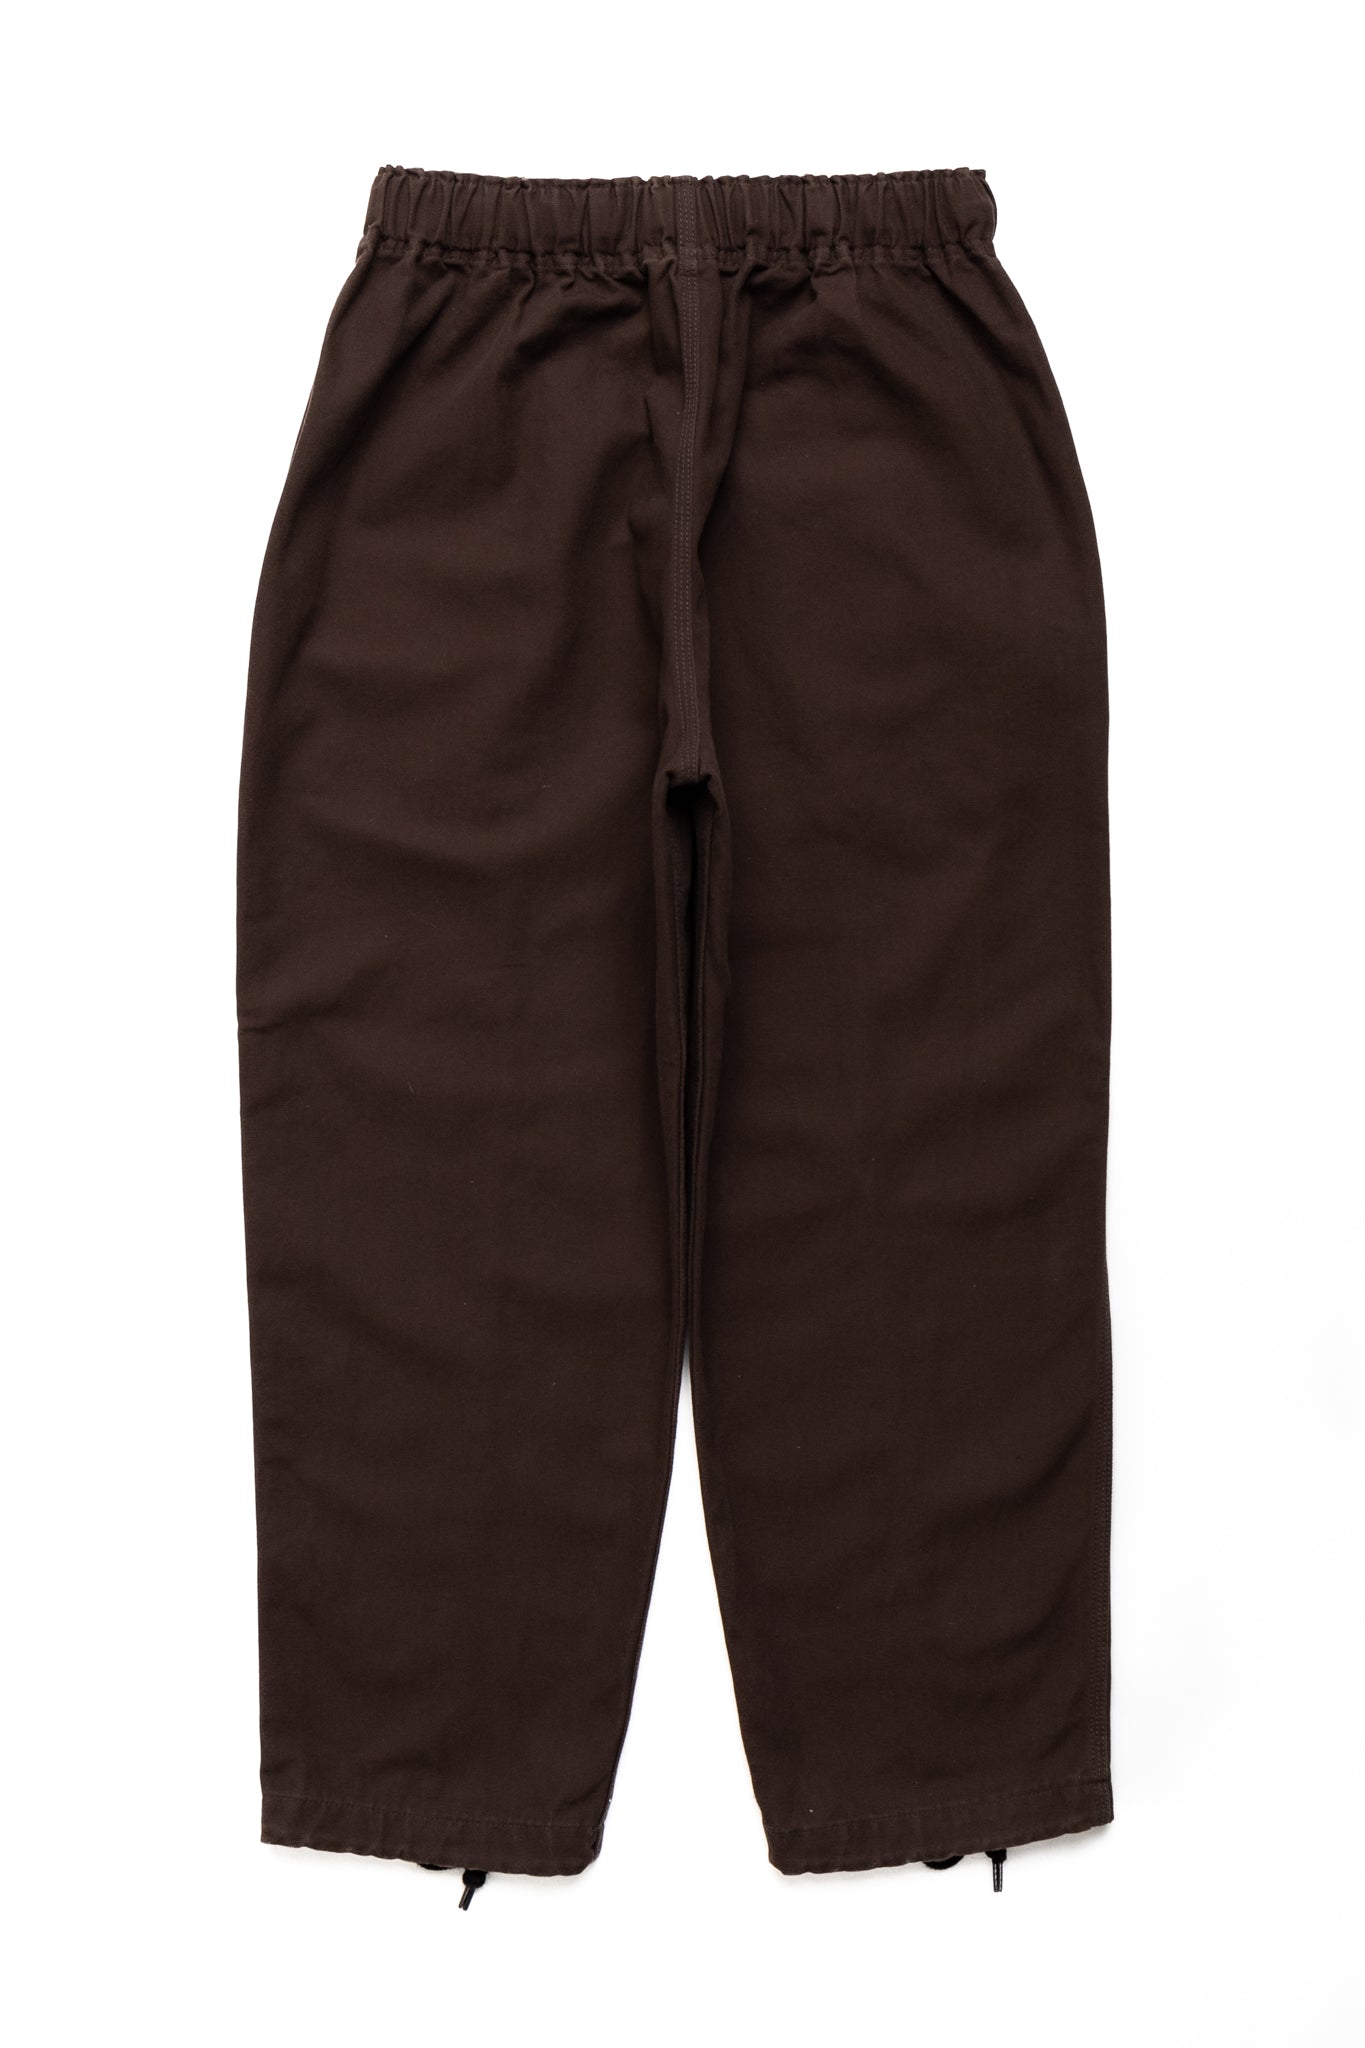 Belted C.S. Pant 11.5oz Cotton Canvas - Brown